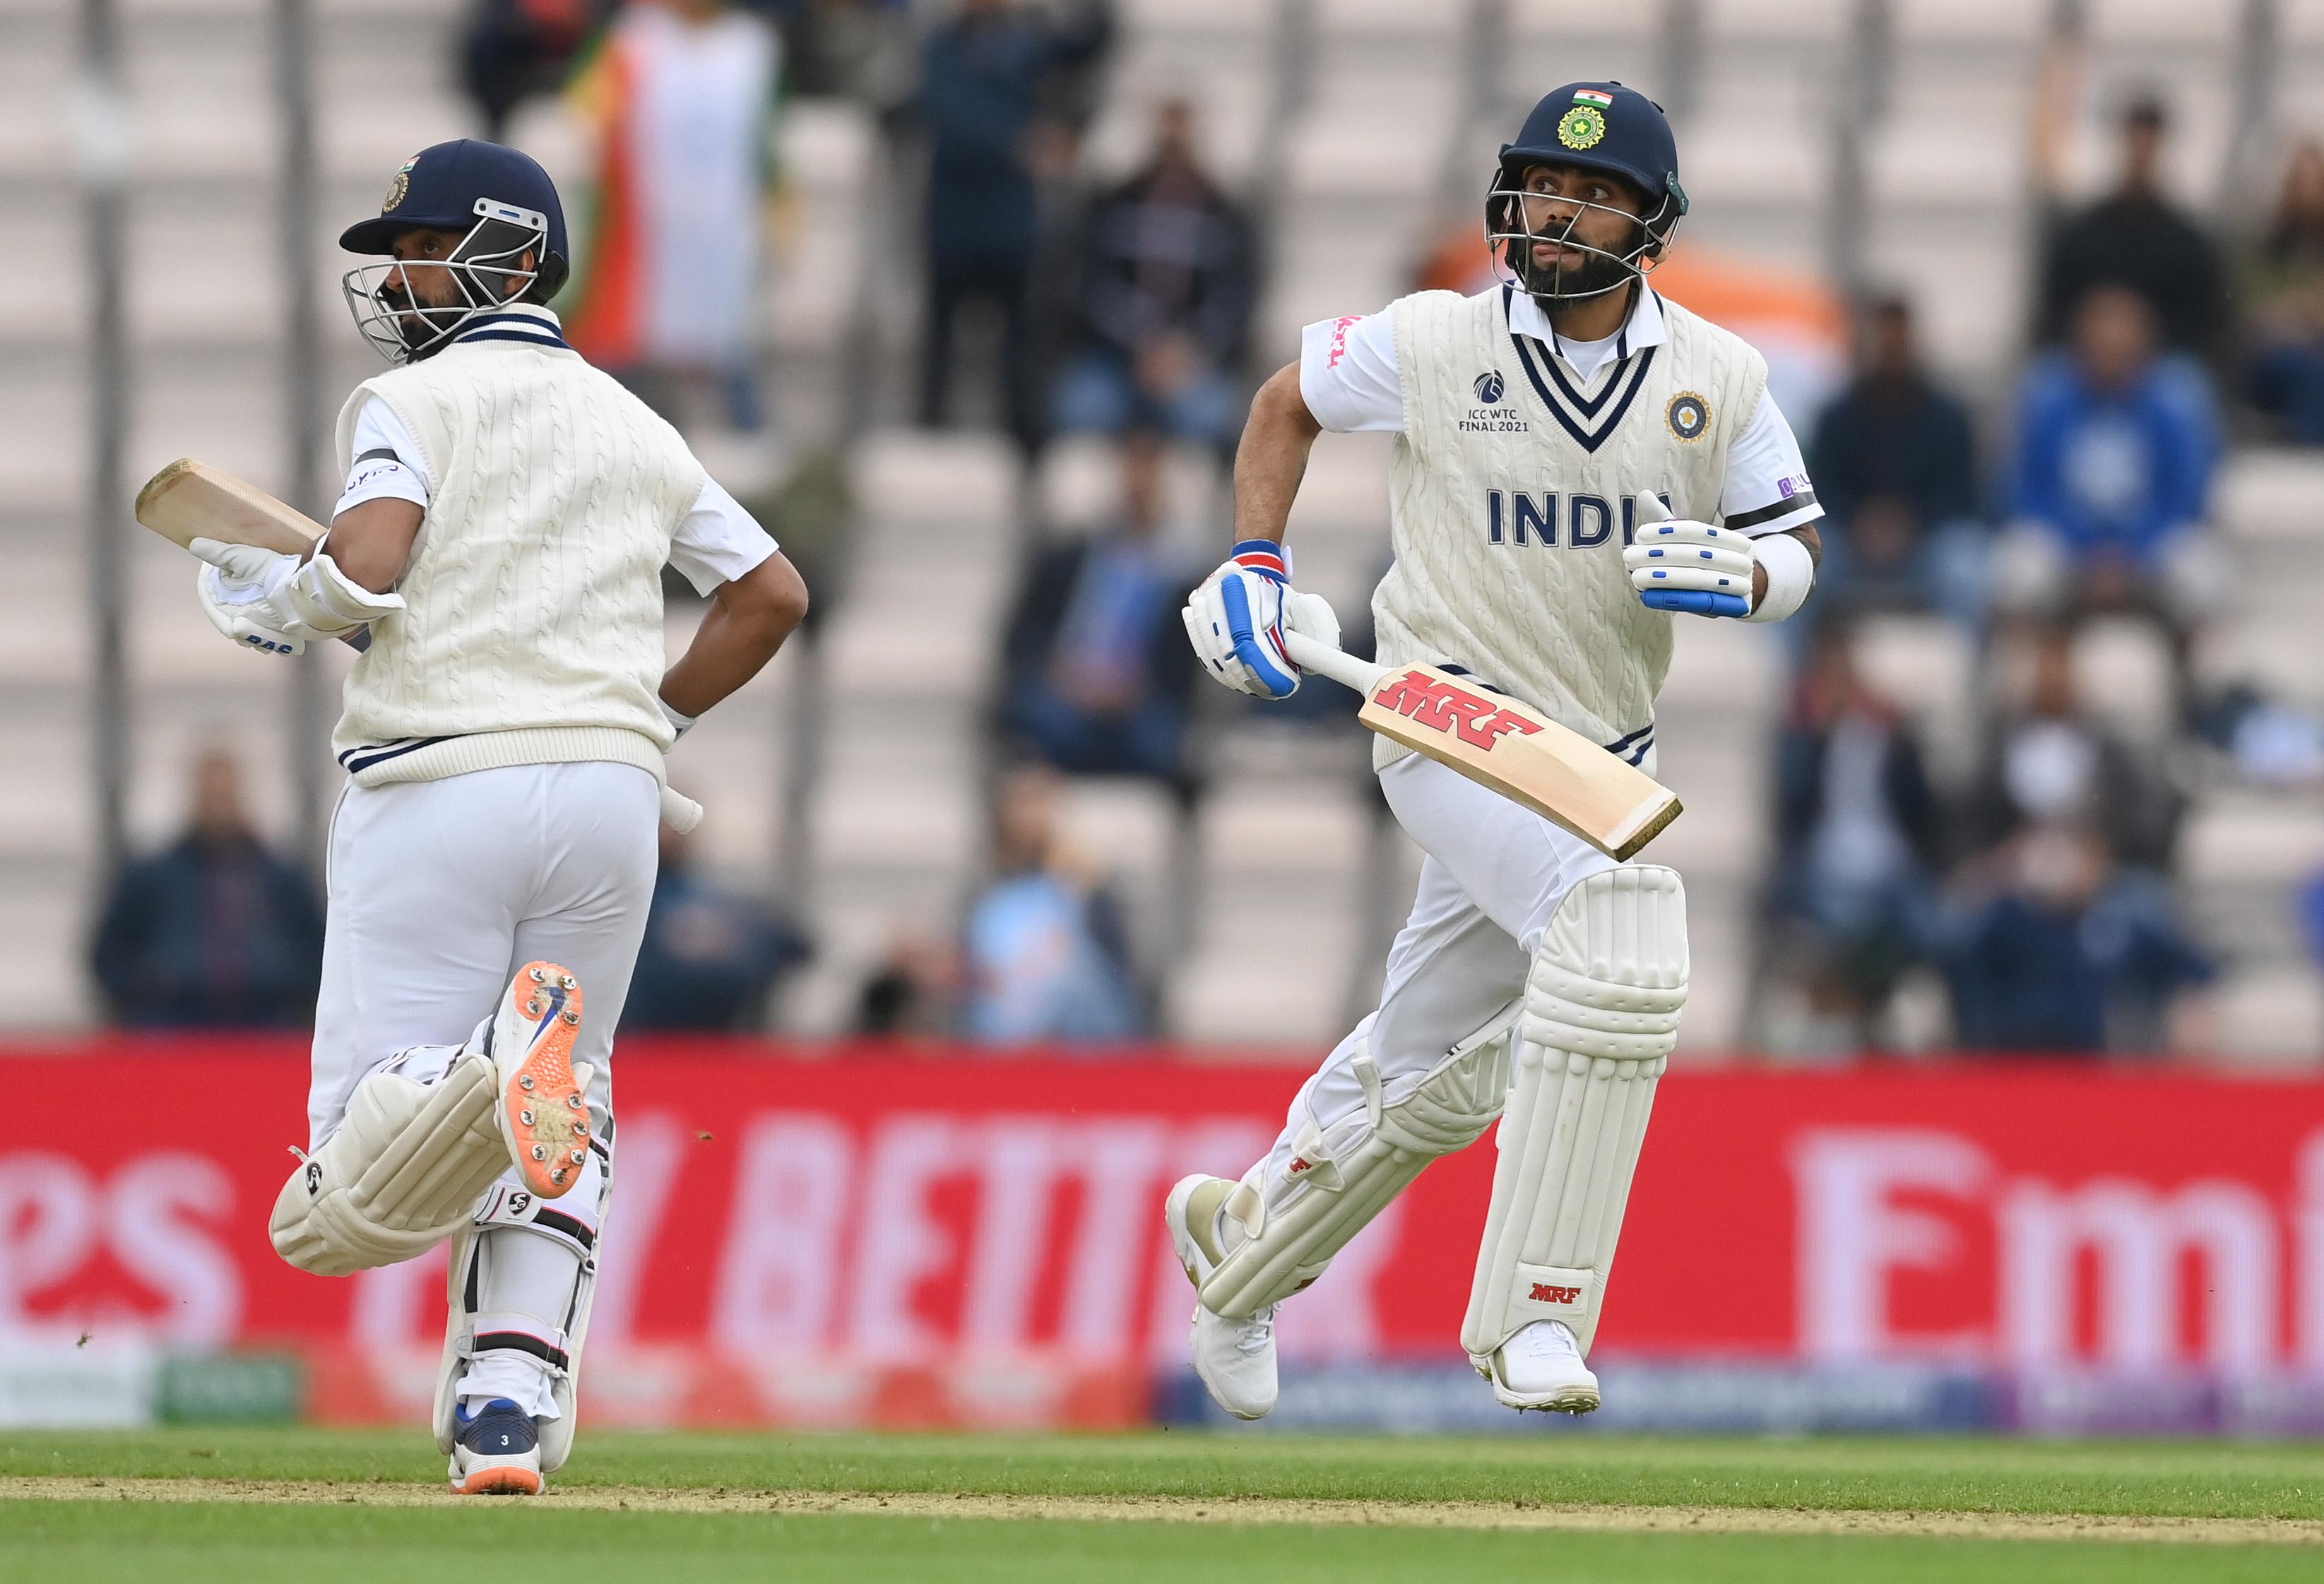 Twitter reacts as India lose Virat, Pujara early on final day